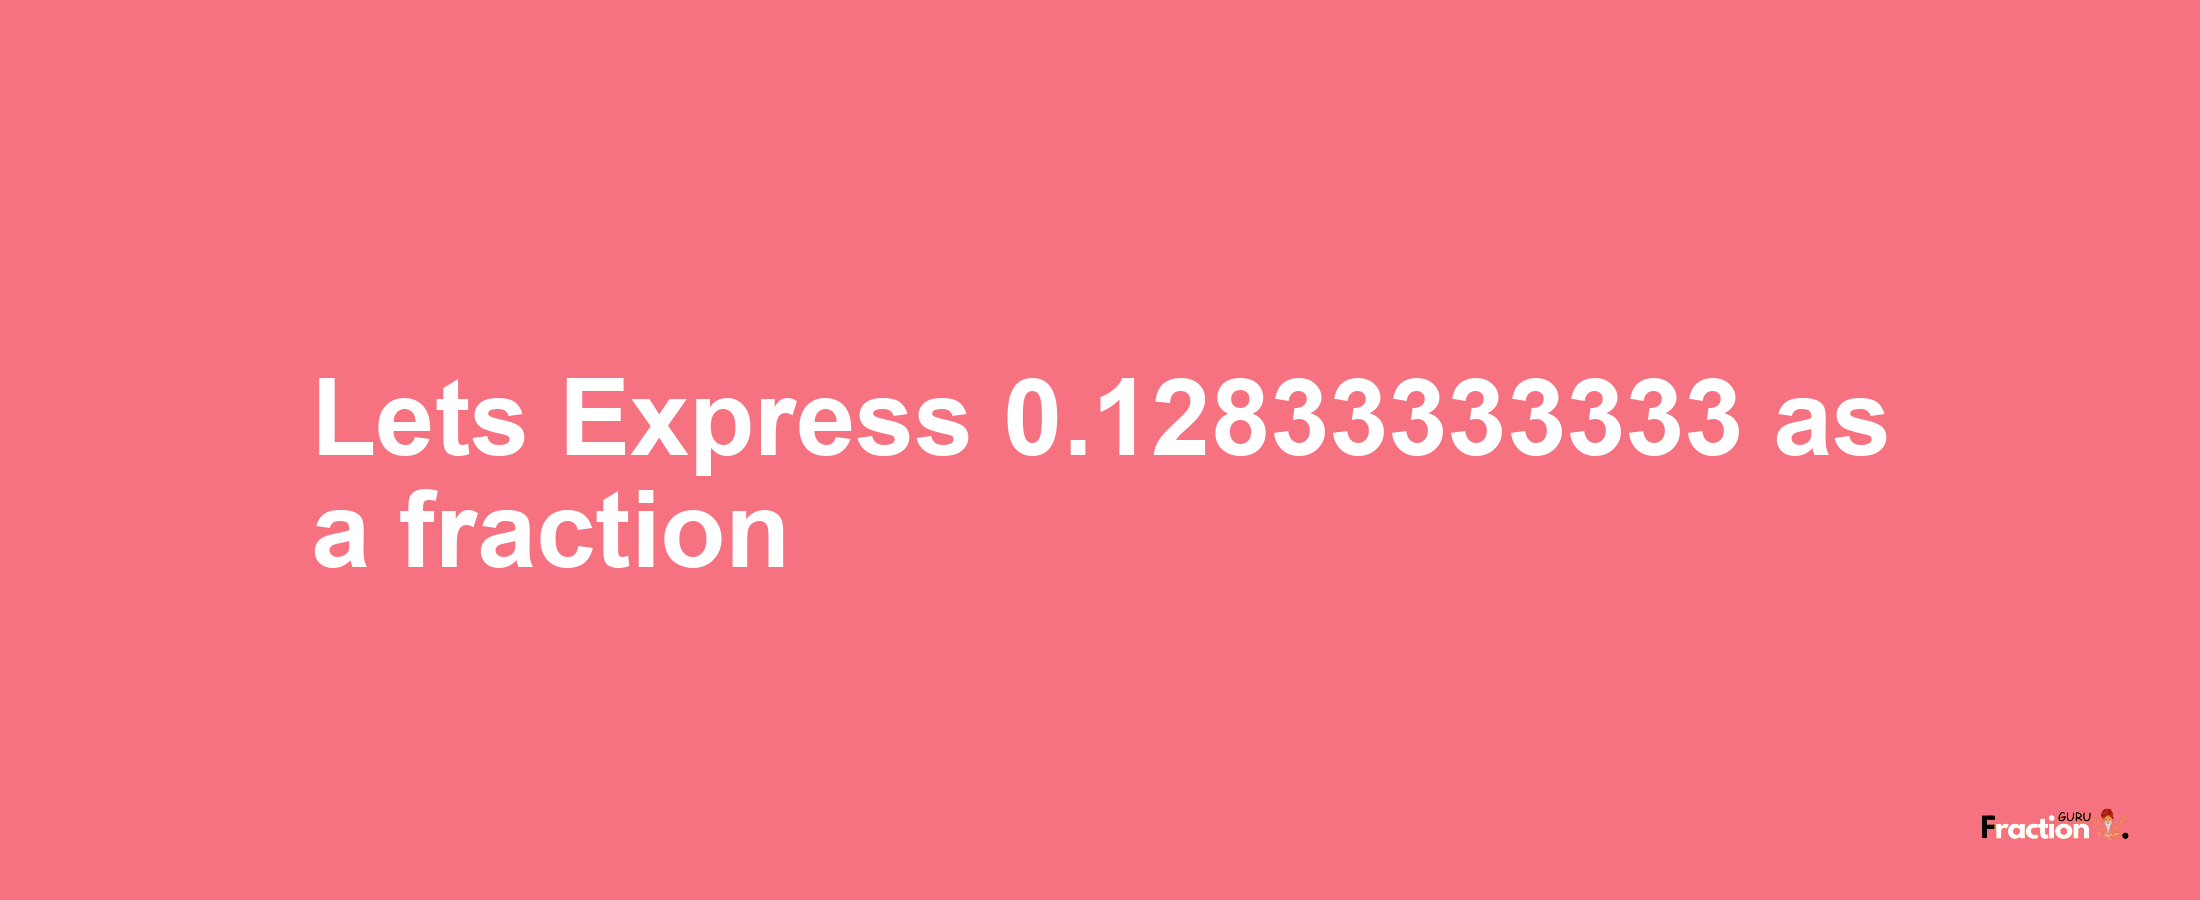 Lets Express 0.12833333333 as afraction